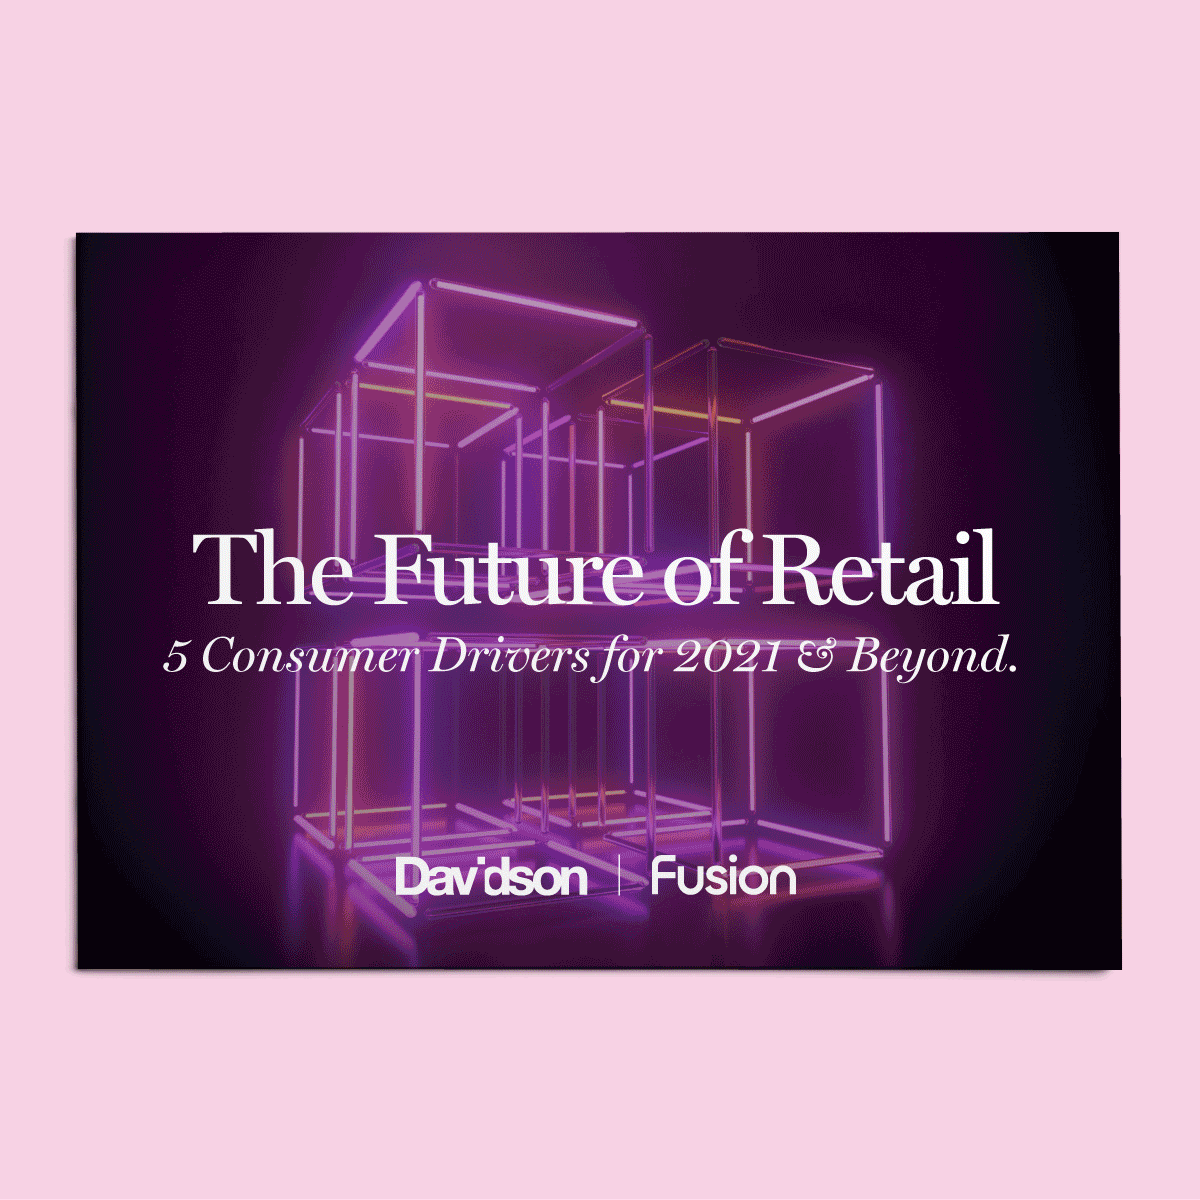 The Future of Retail 5 Consumer Drivers for 2021 & Beyond